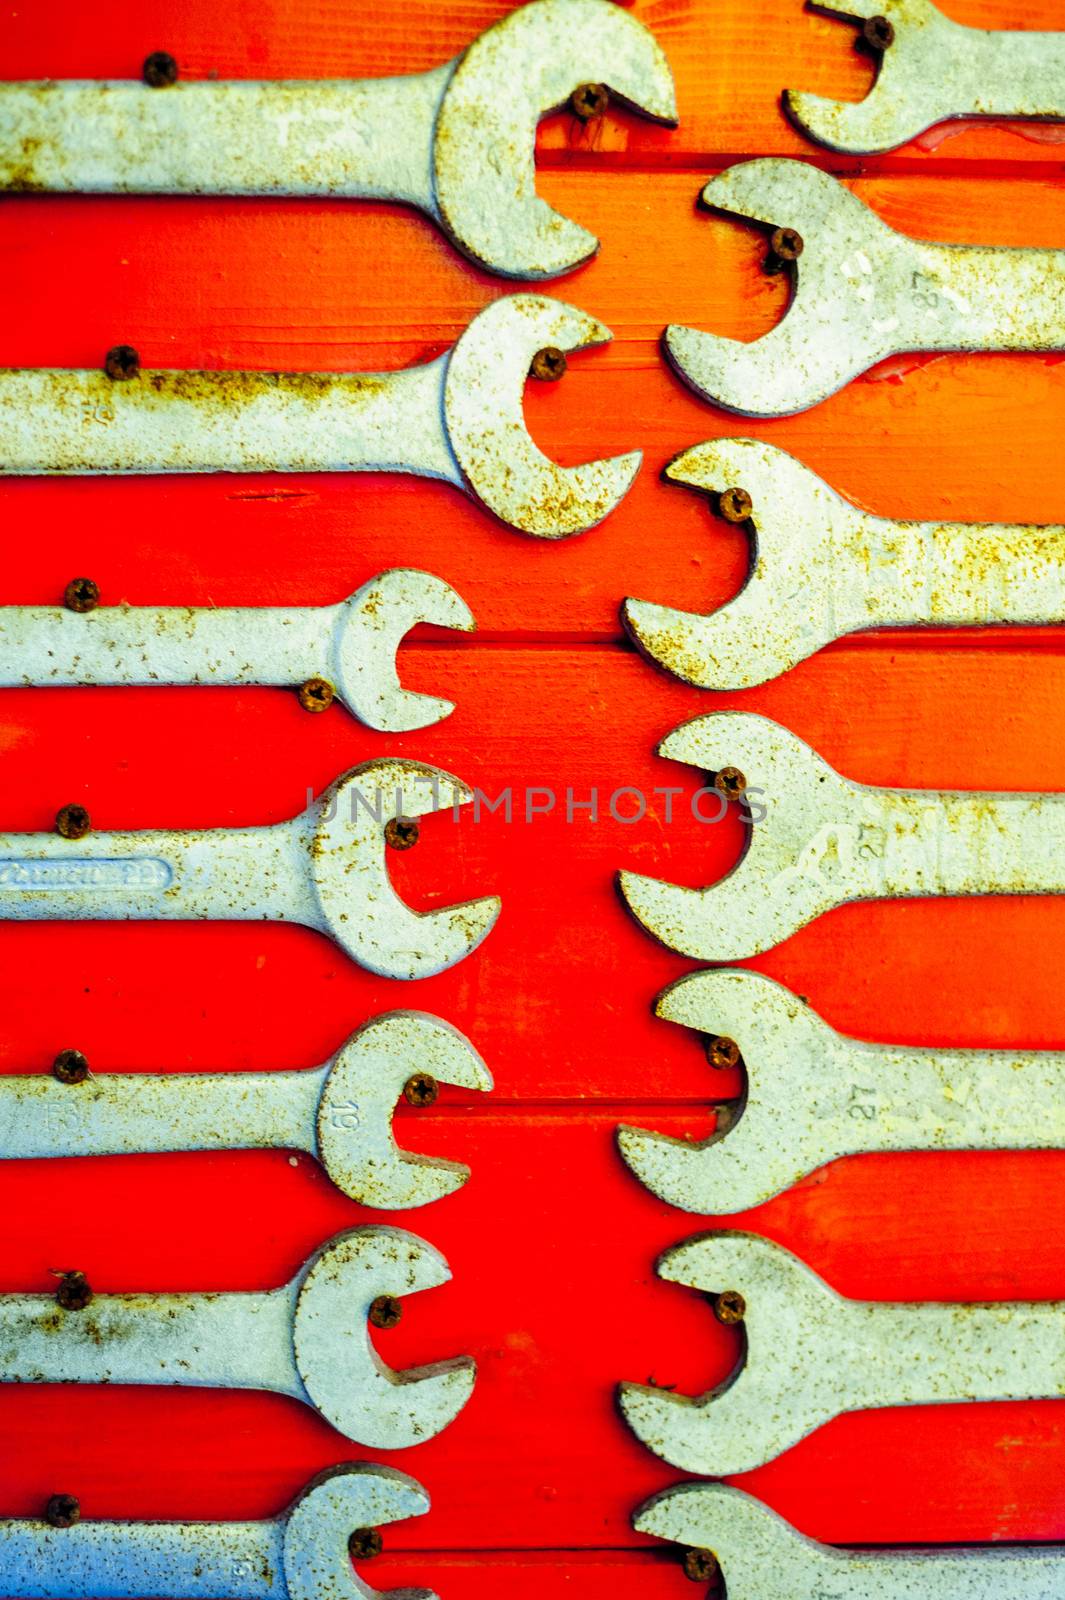 old and used english keys on red background